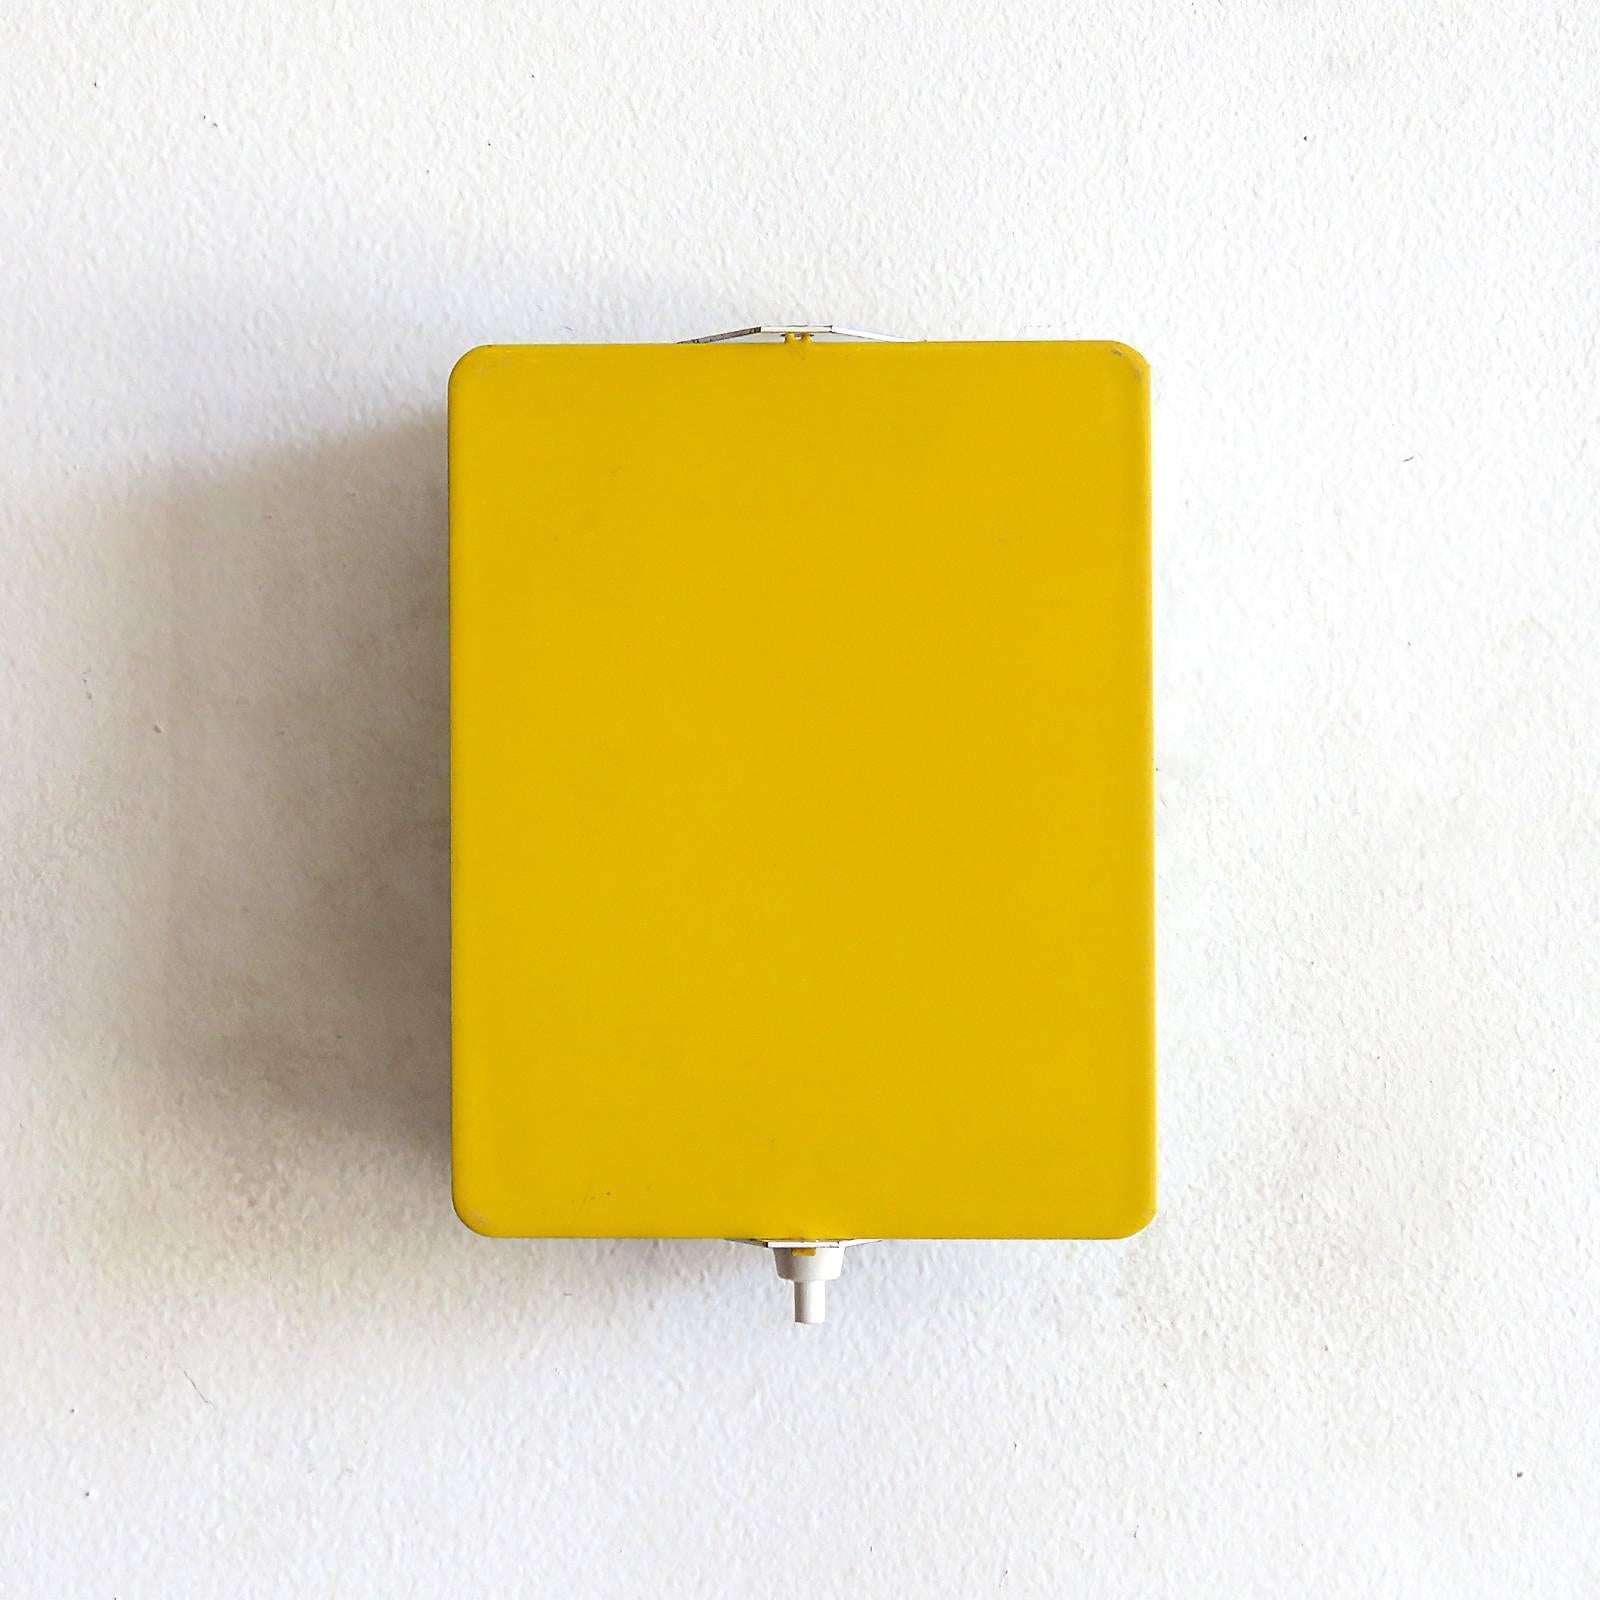 Iconic enameled wall lights by Charlotte Perriand with adjustable reflectors in rare yellow finish, optional horizontal or vertical mount, manufactured and distributed by Steph Simon, Paris, marked. Priced individually.